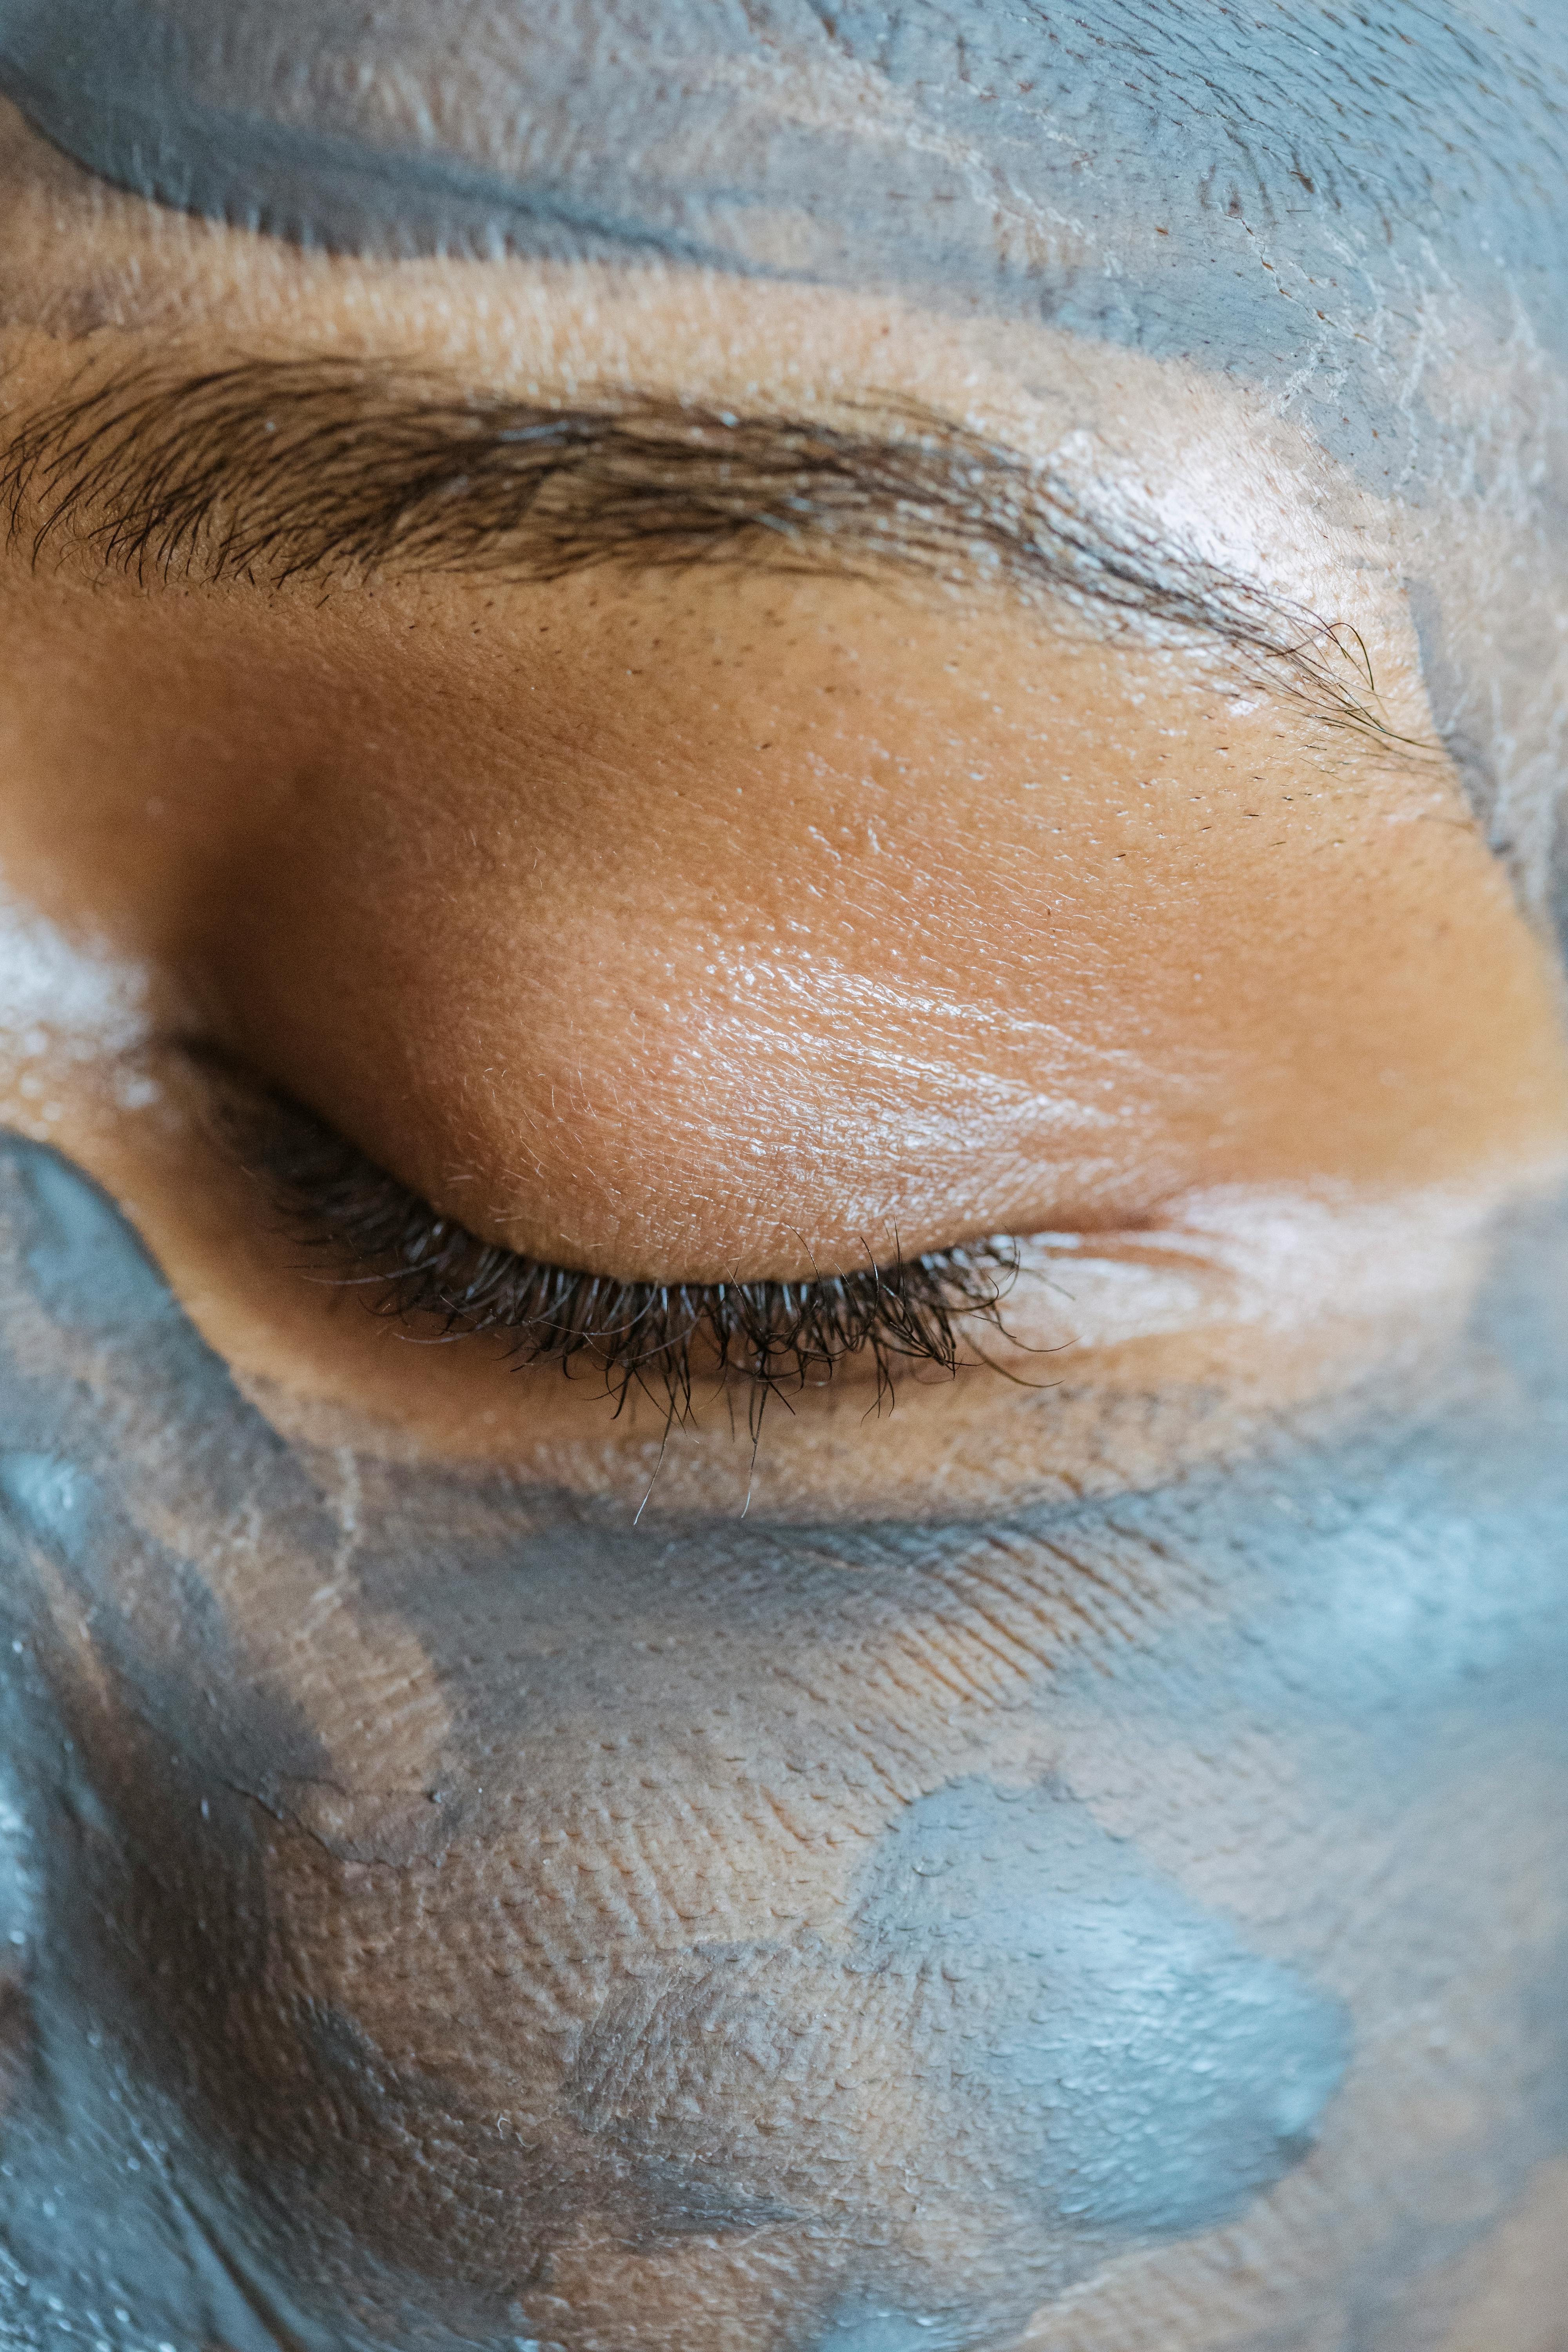 How Do Experts Ensure The Safe Removal Of Eyelash Extensions Without Damage To Natural Lashes?